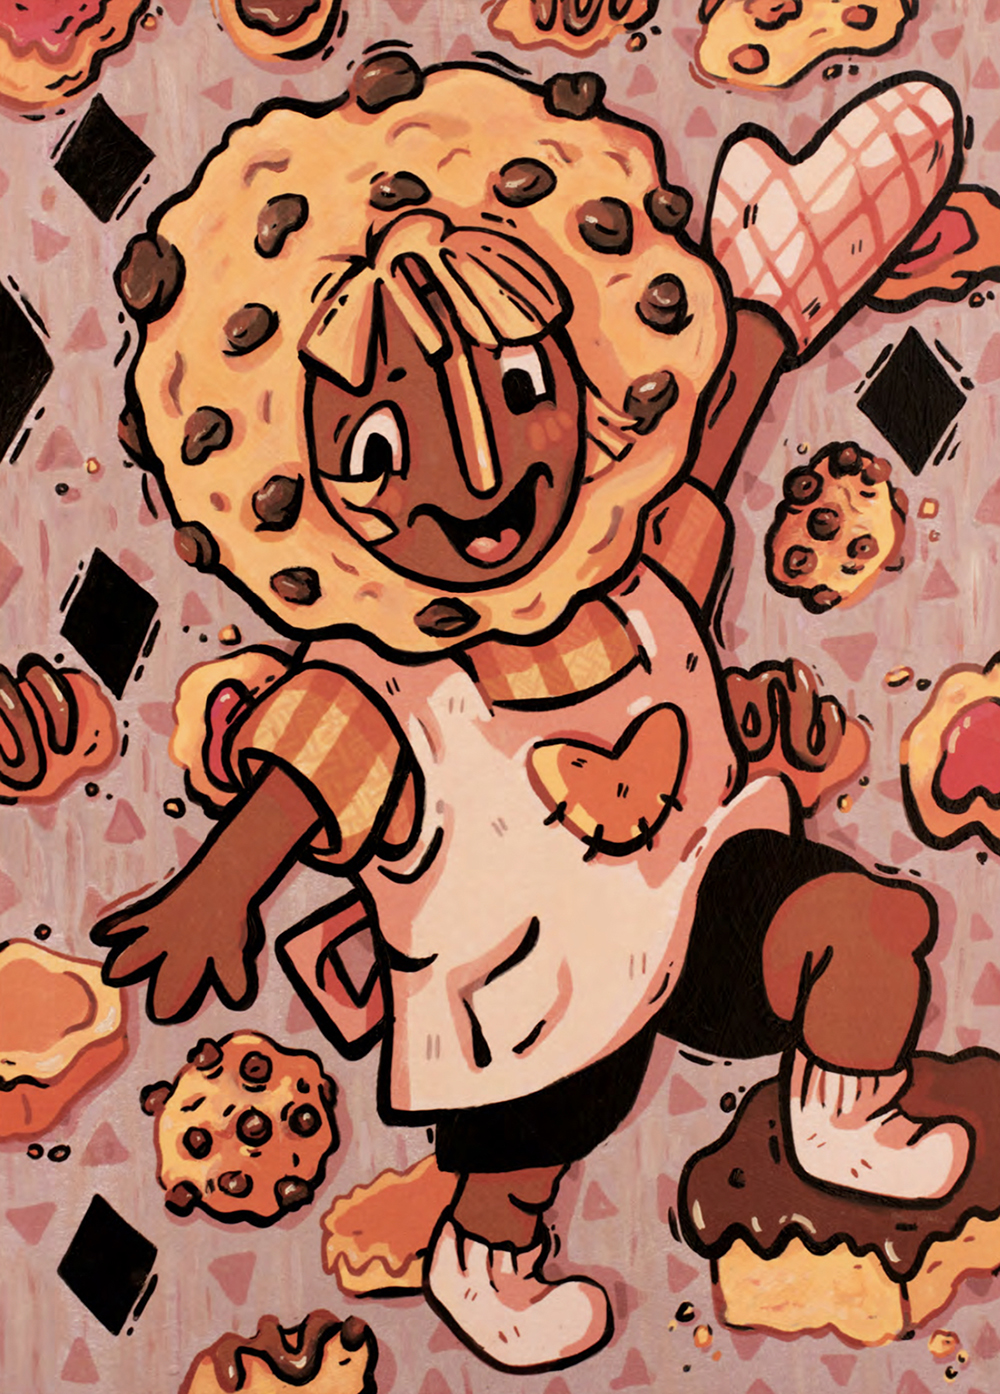 A girl with a giant cookie around her head, surrounded by a background of treats.